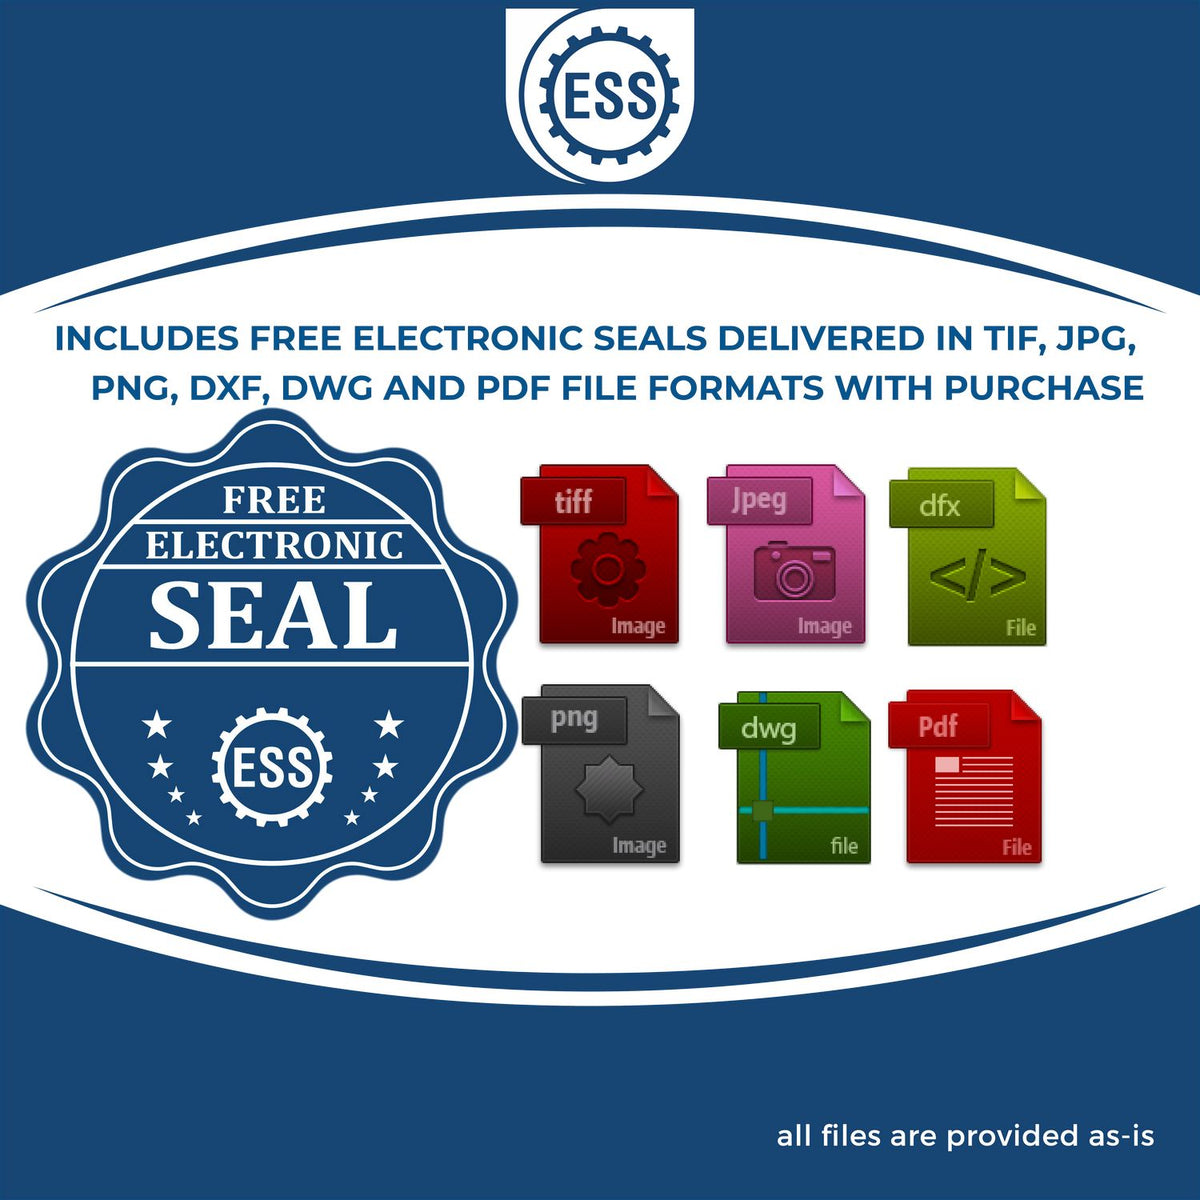 An infographic for the free electronic seal for the Slim Pre-Inked Alabama Land Surveyor Seal Stamp illustrating the different file type icons such as DXF, DWG, TIF, JPG and PNG.